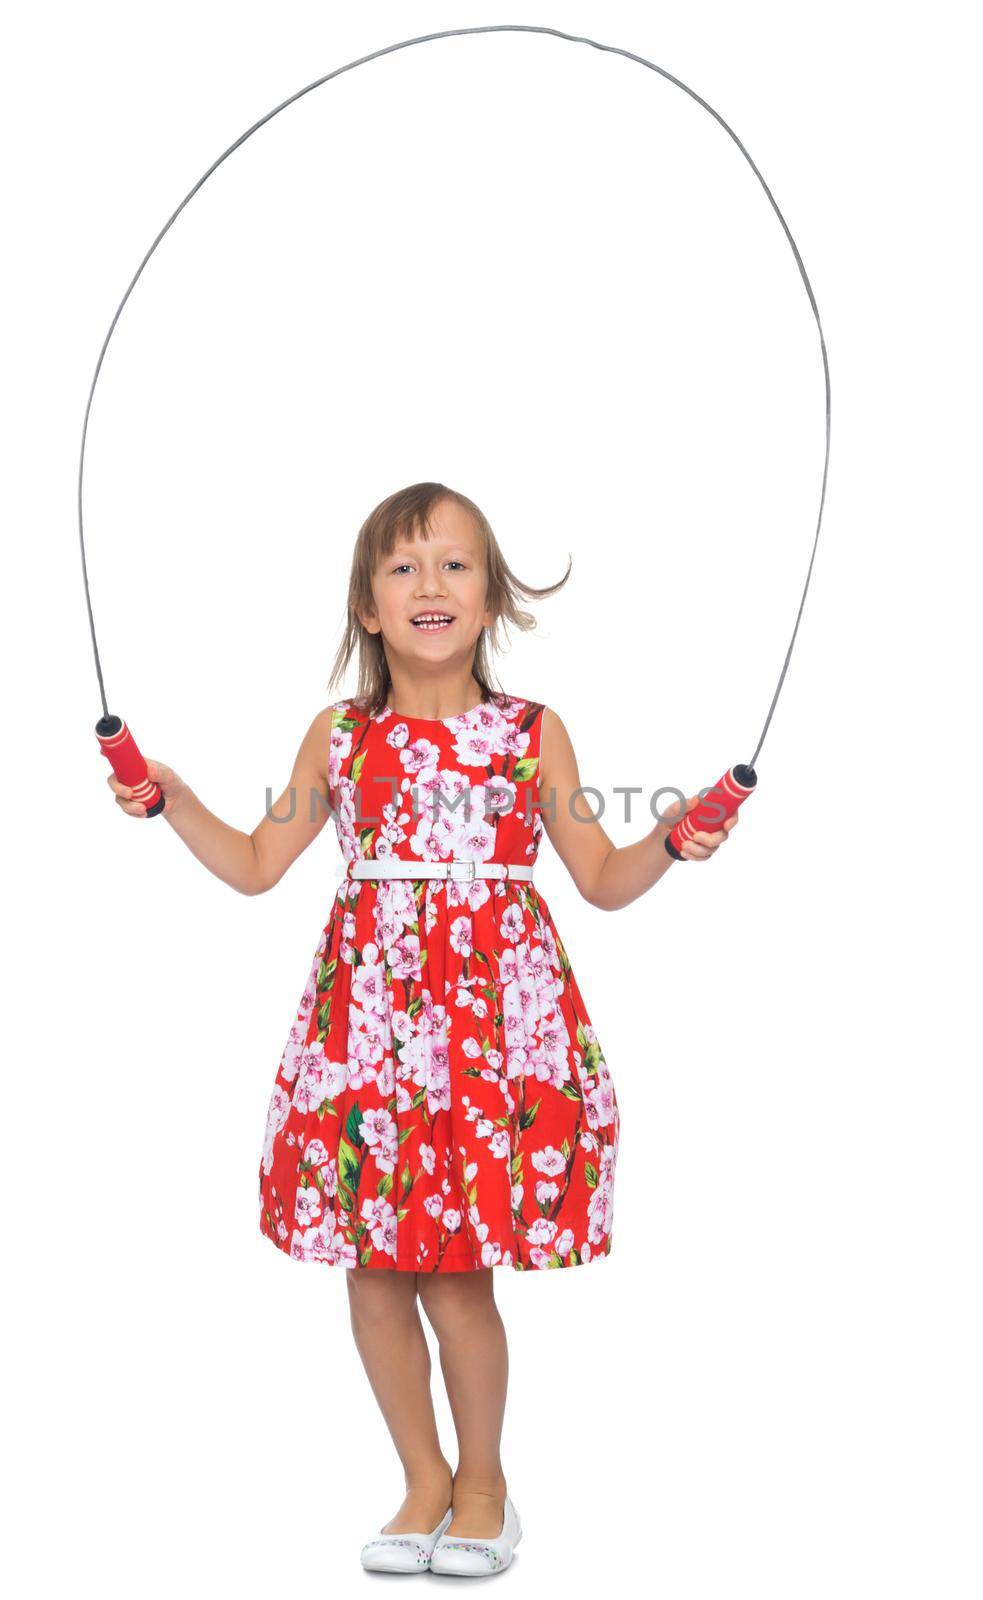 Cheerful little girl jumping rope - Isolated on white background